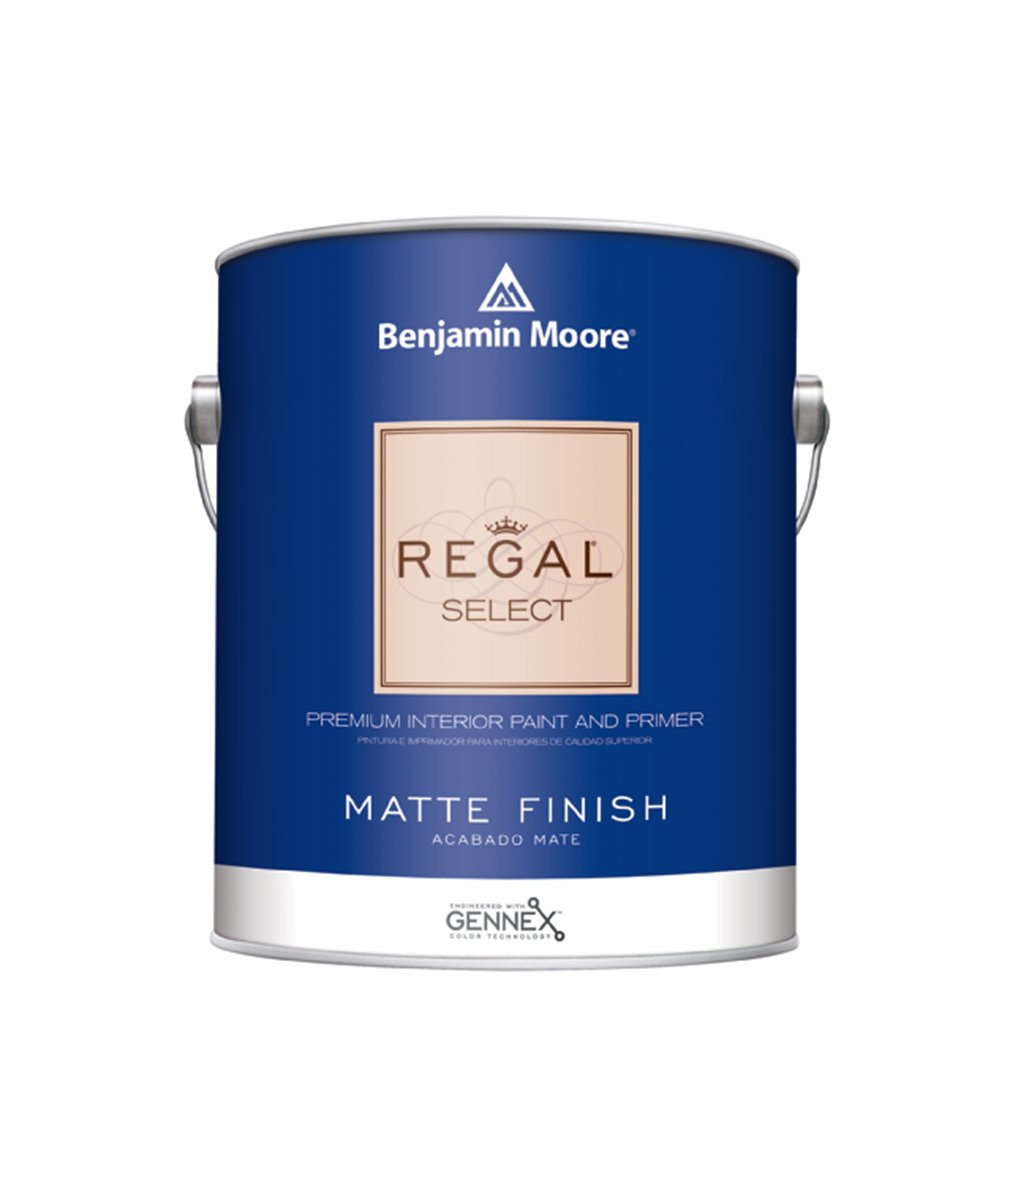 Benjamin Moore Regal Select Matte Paint available at JC Licht.